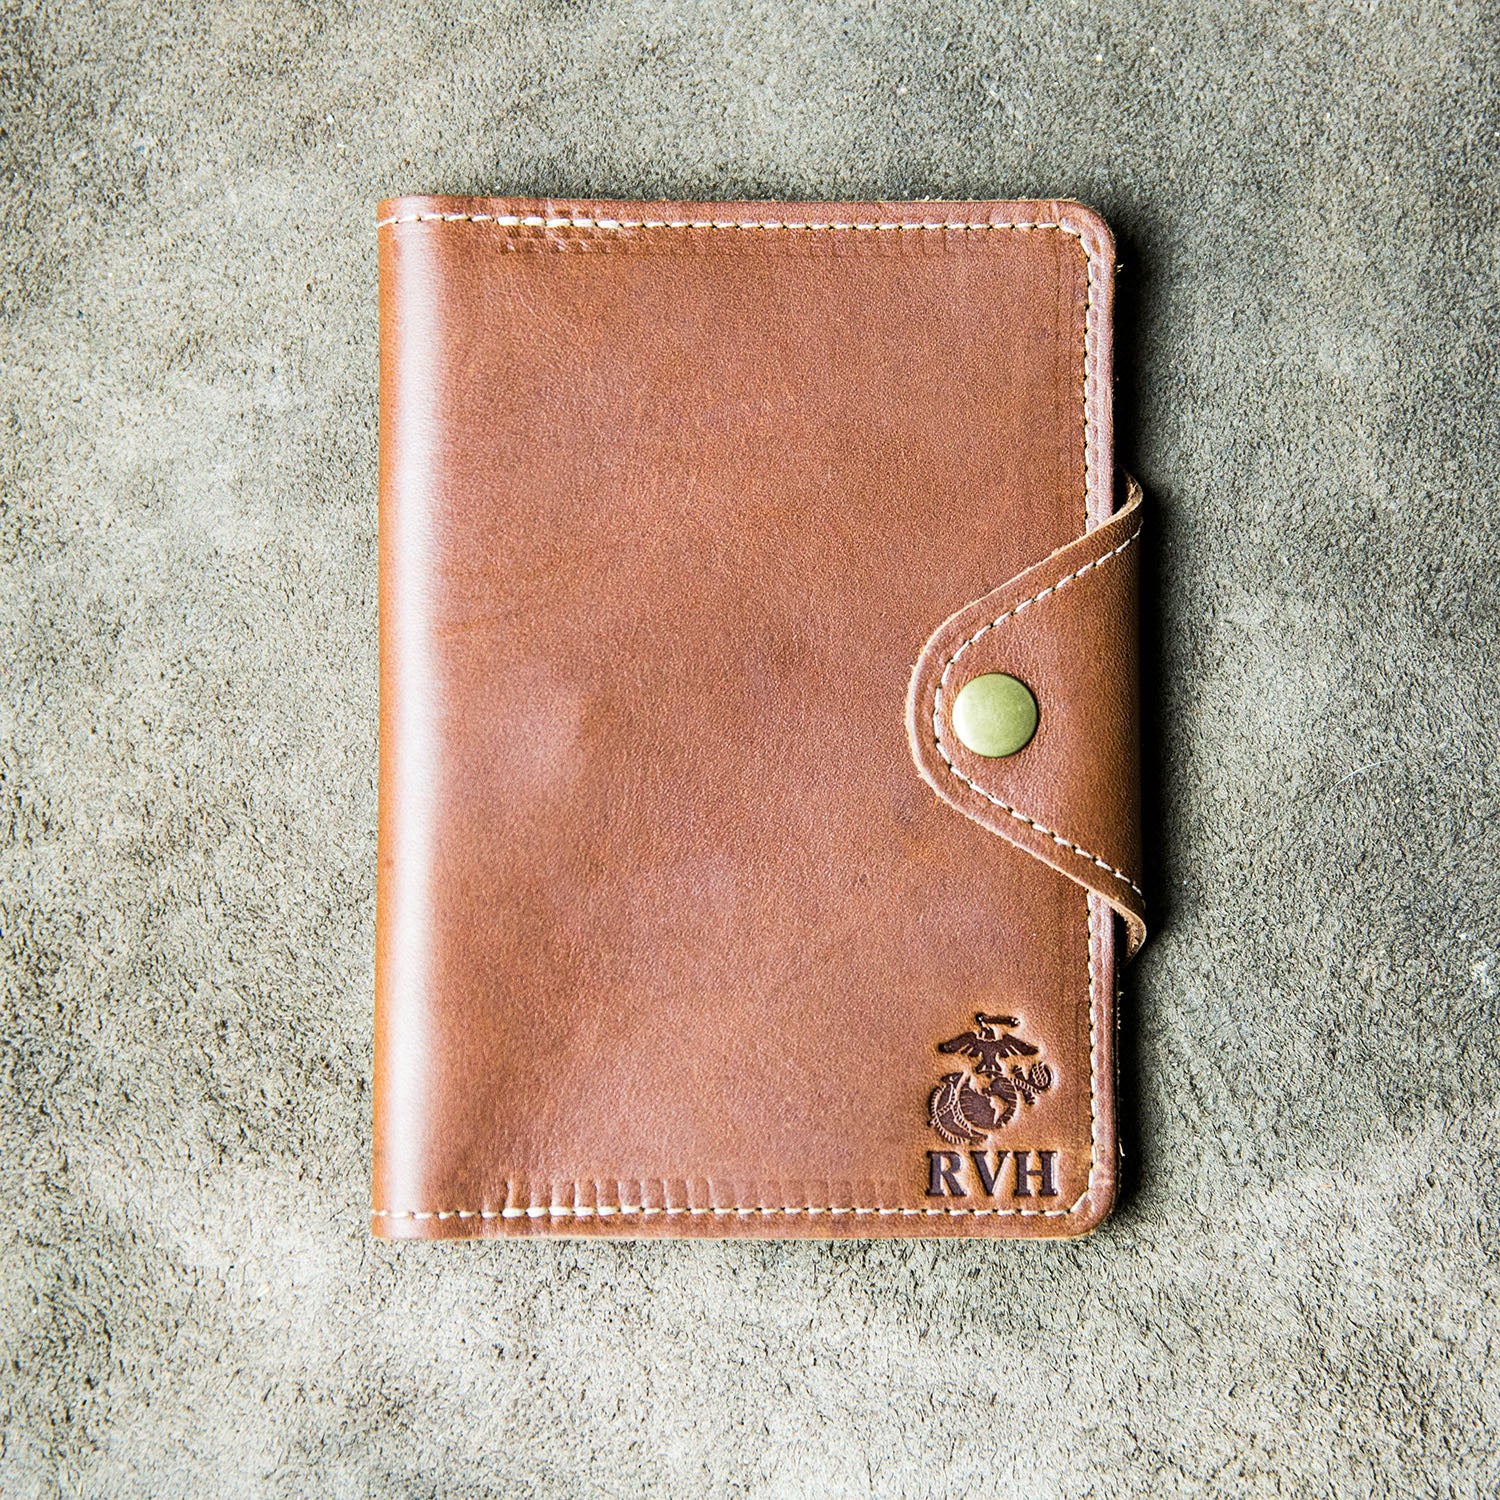 Fine leather logbook and wallet with personalized initials and Marine Corps logo